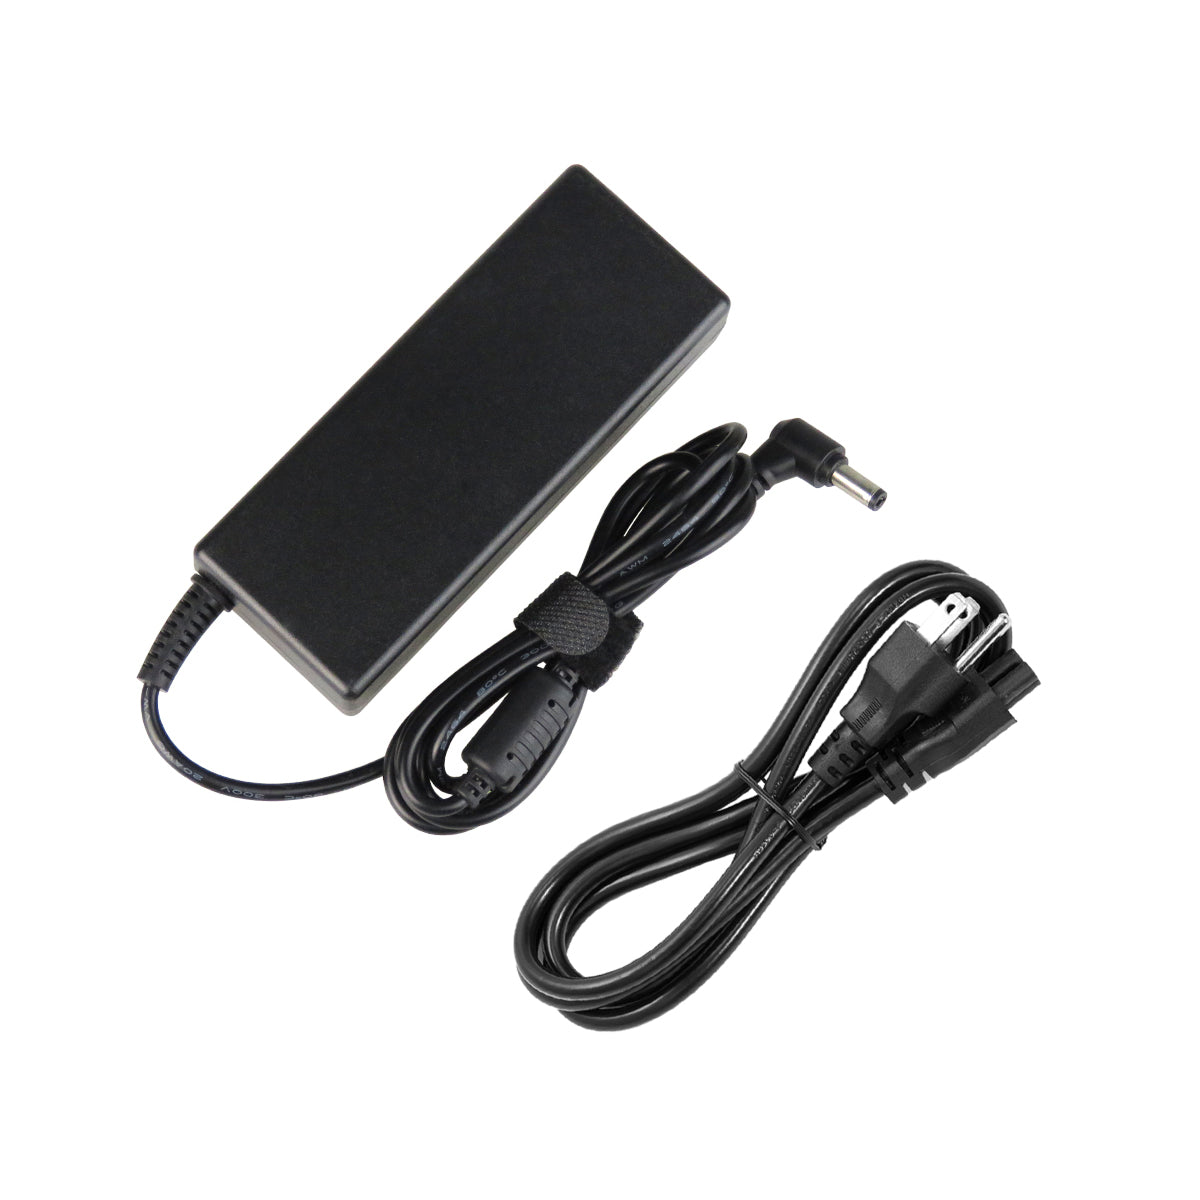 AC Adapter Charger for Toshiba Satellite L875 Notebook.